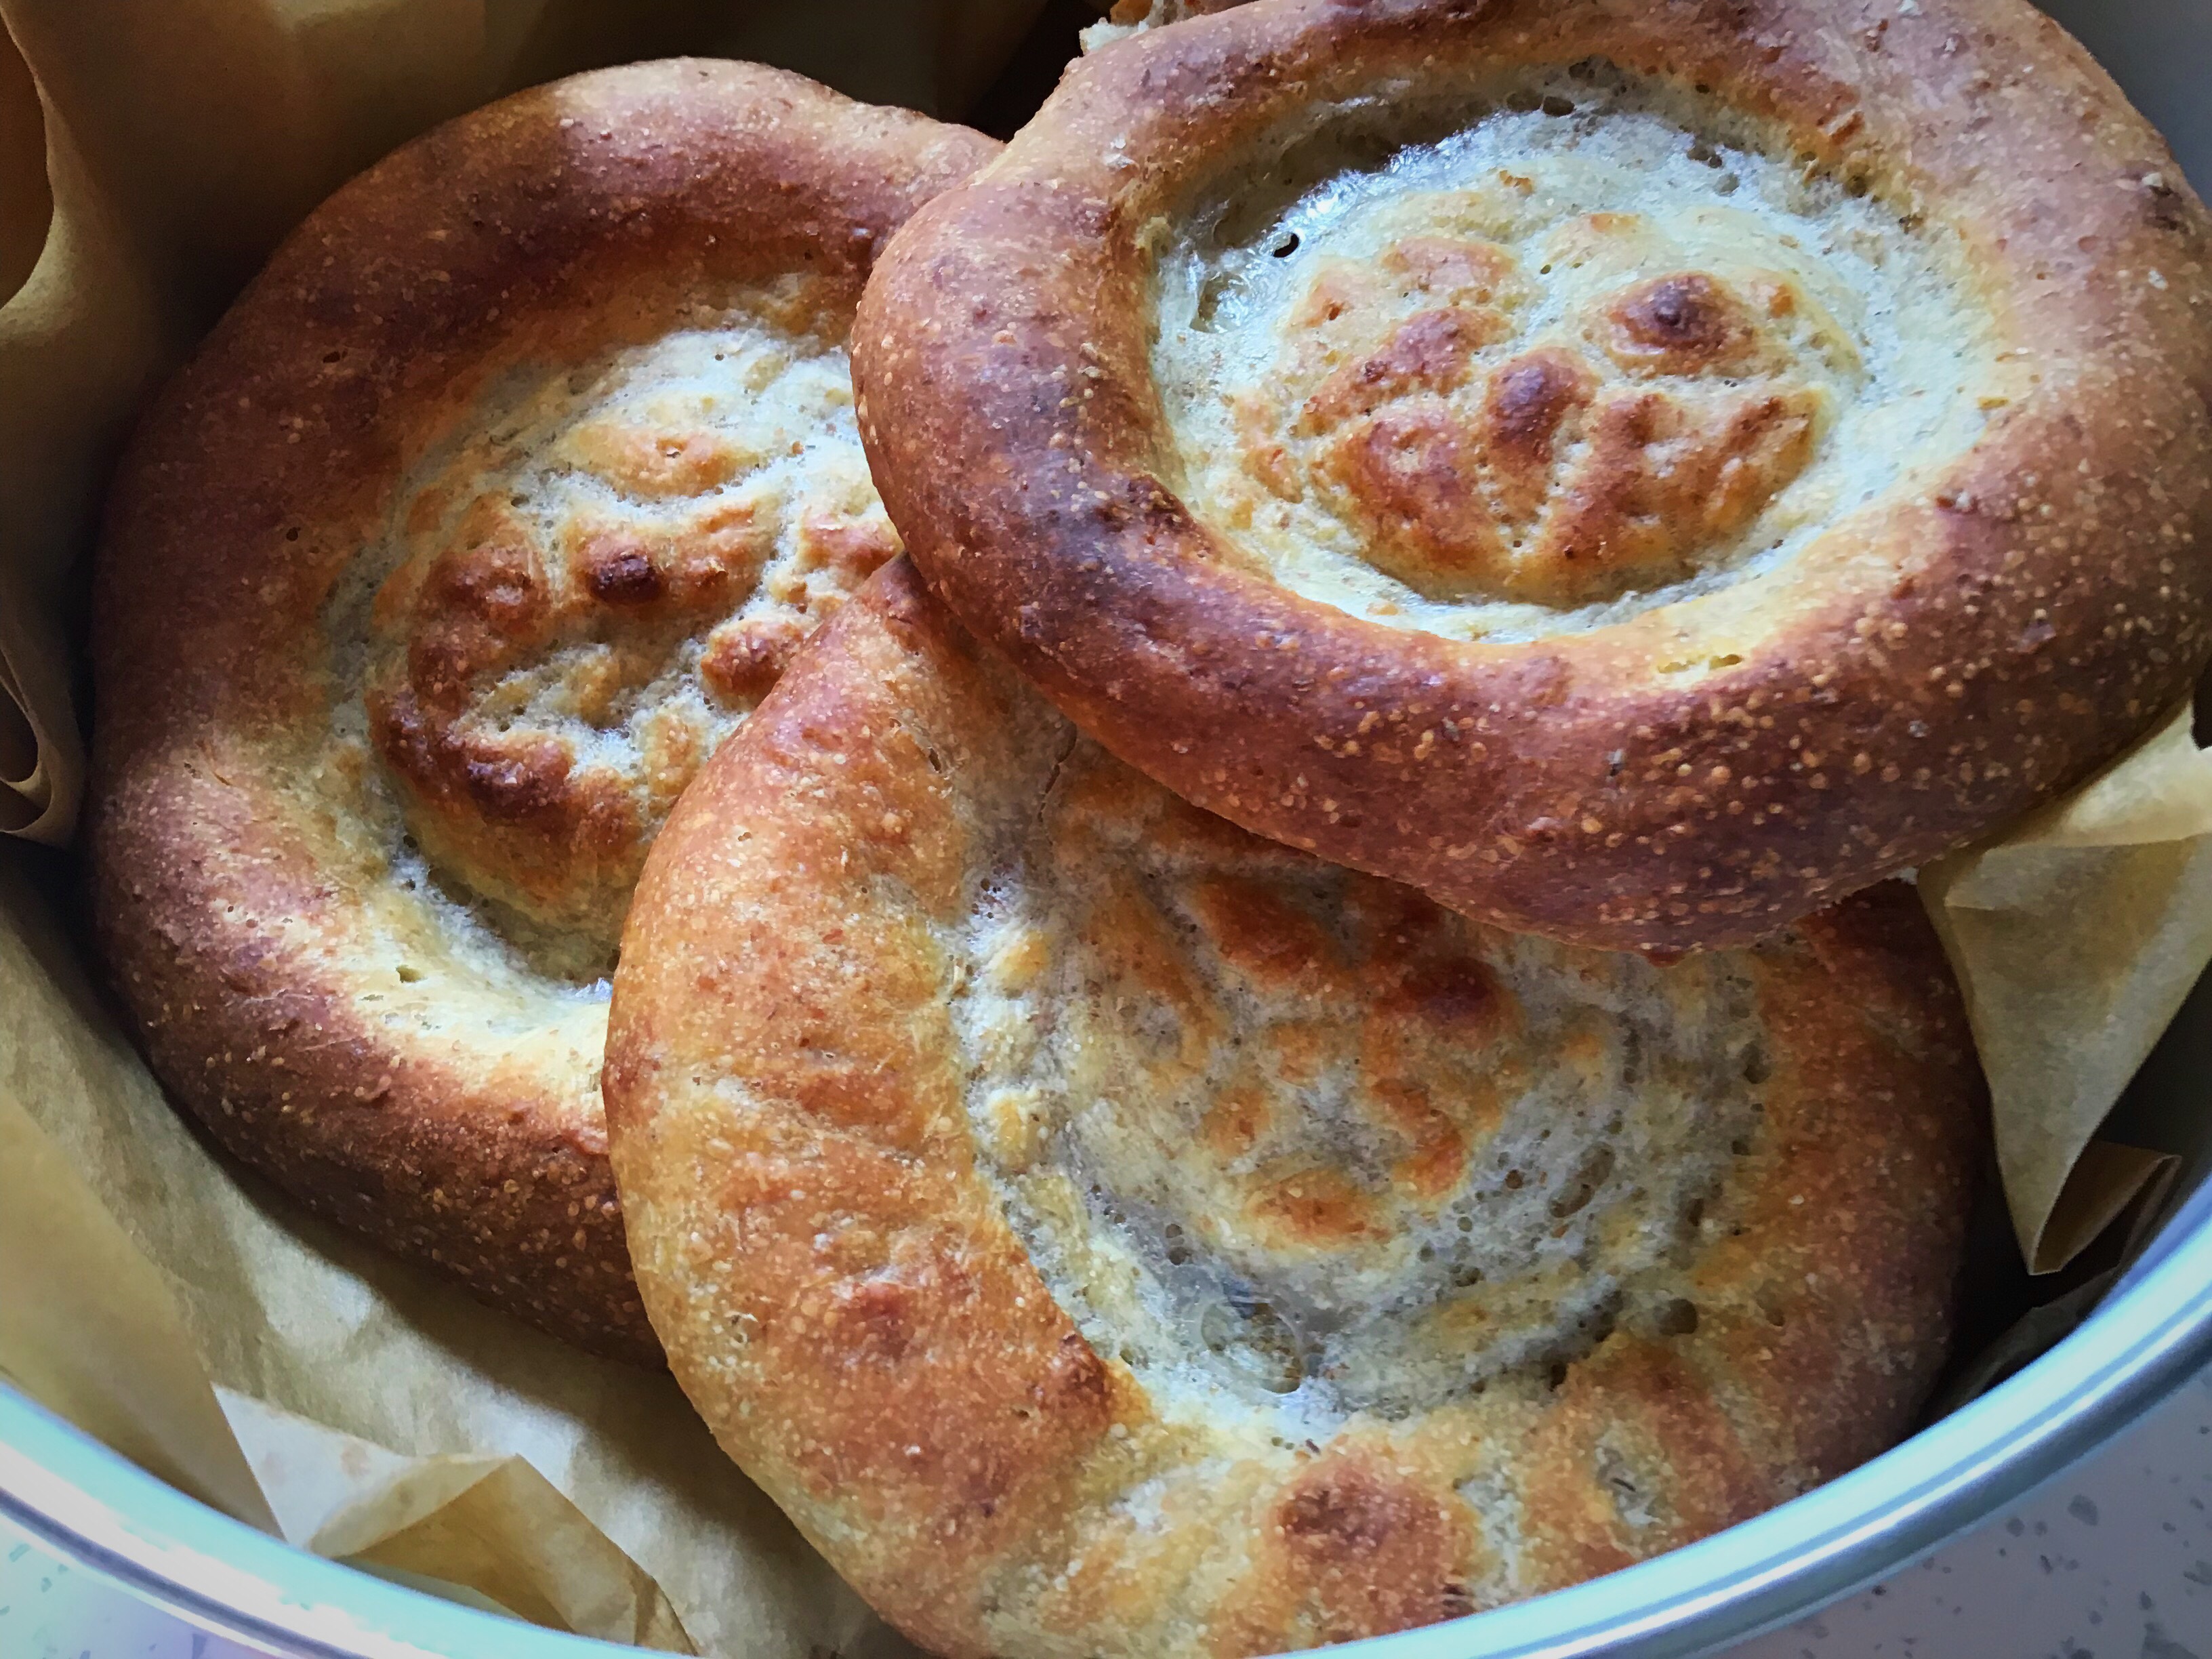 A close up of some bread in a bowl